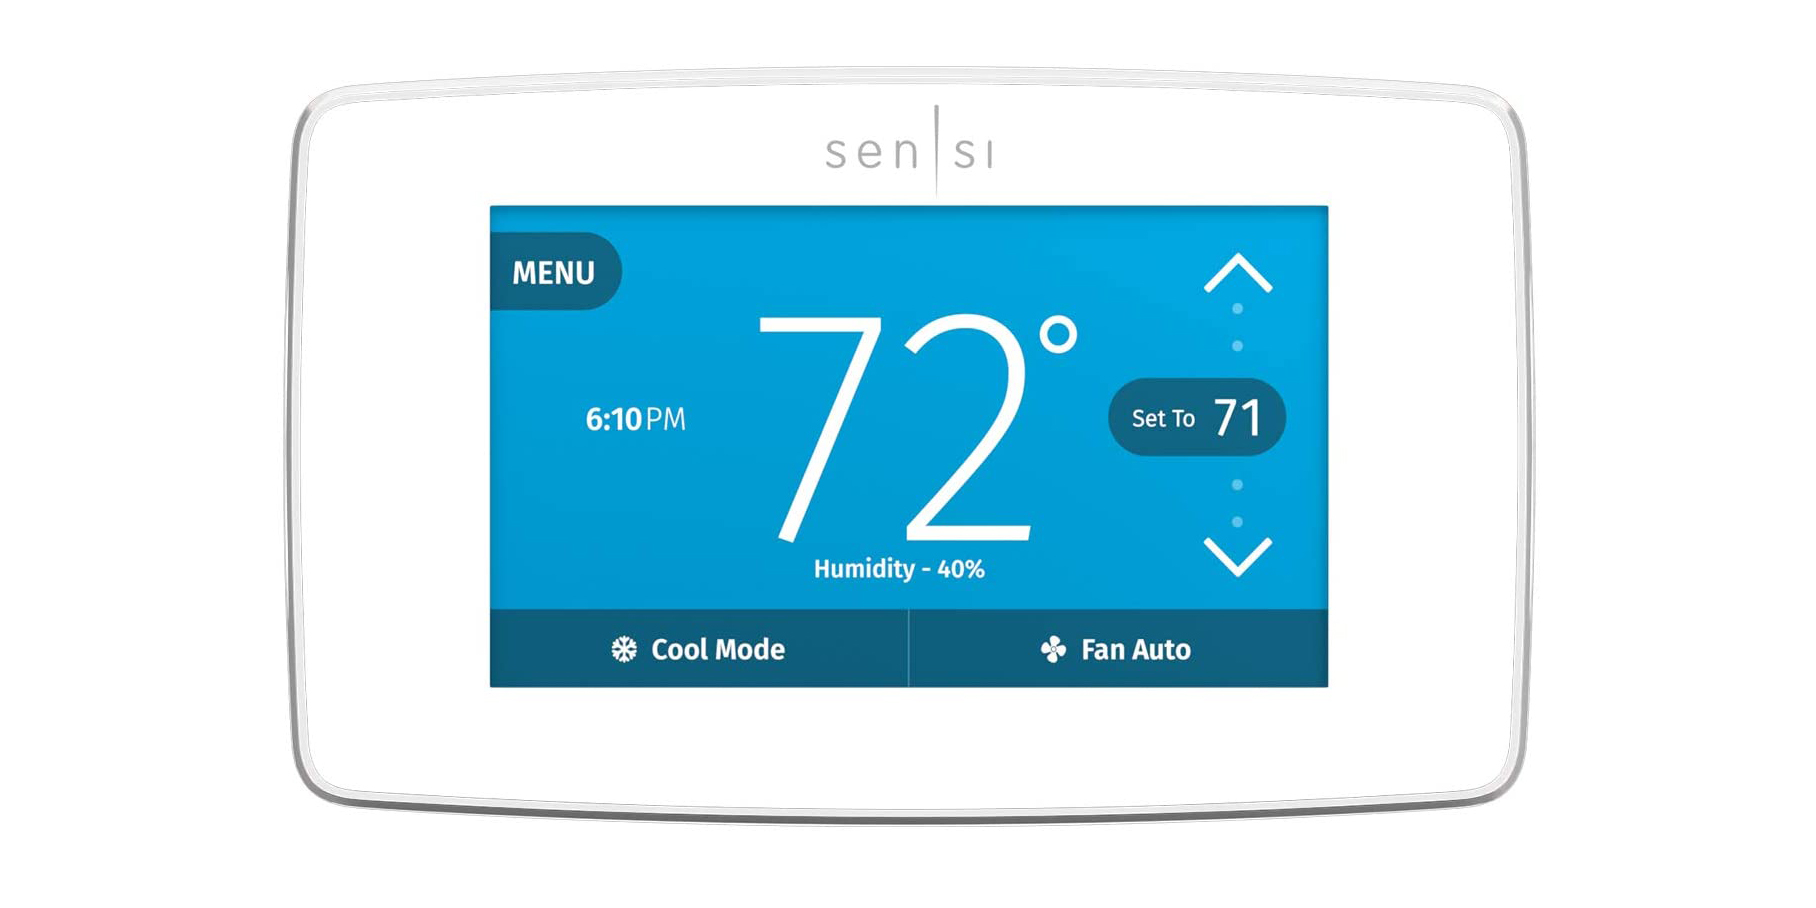 Emerson Sensi Touch Smart Thermostat offers HomeKit control for $106.50.